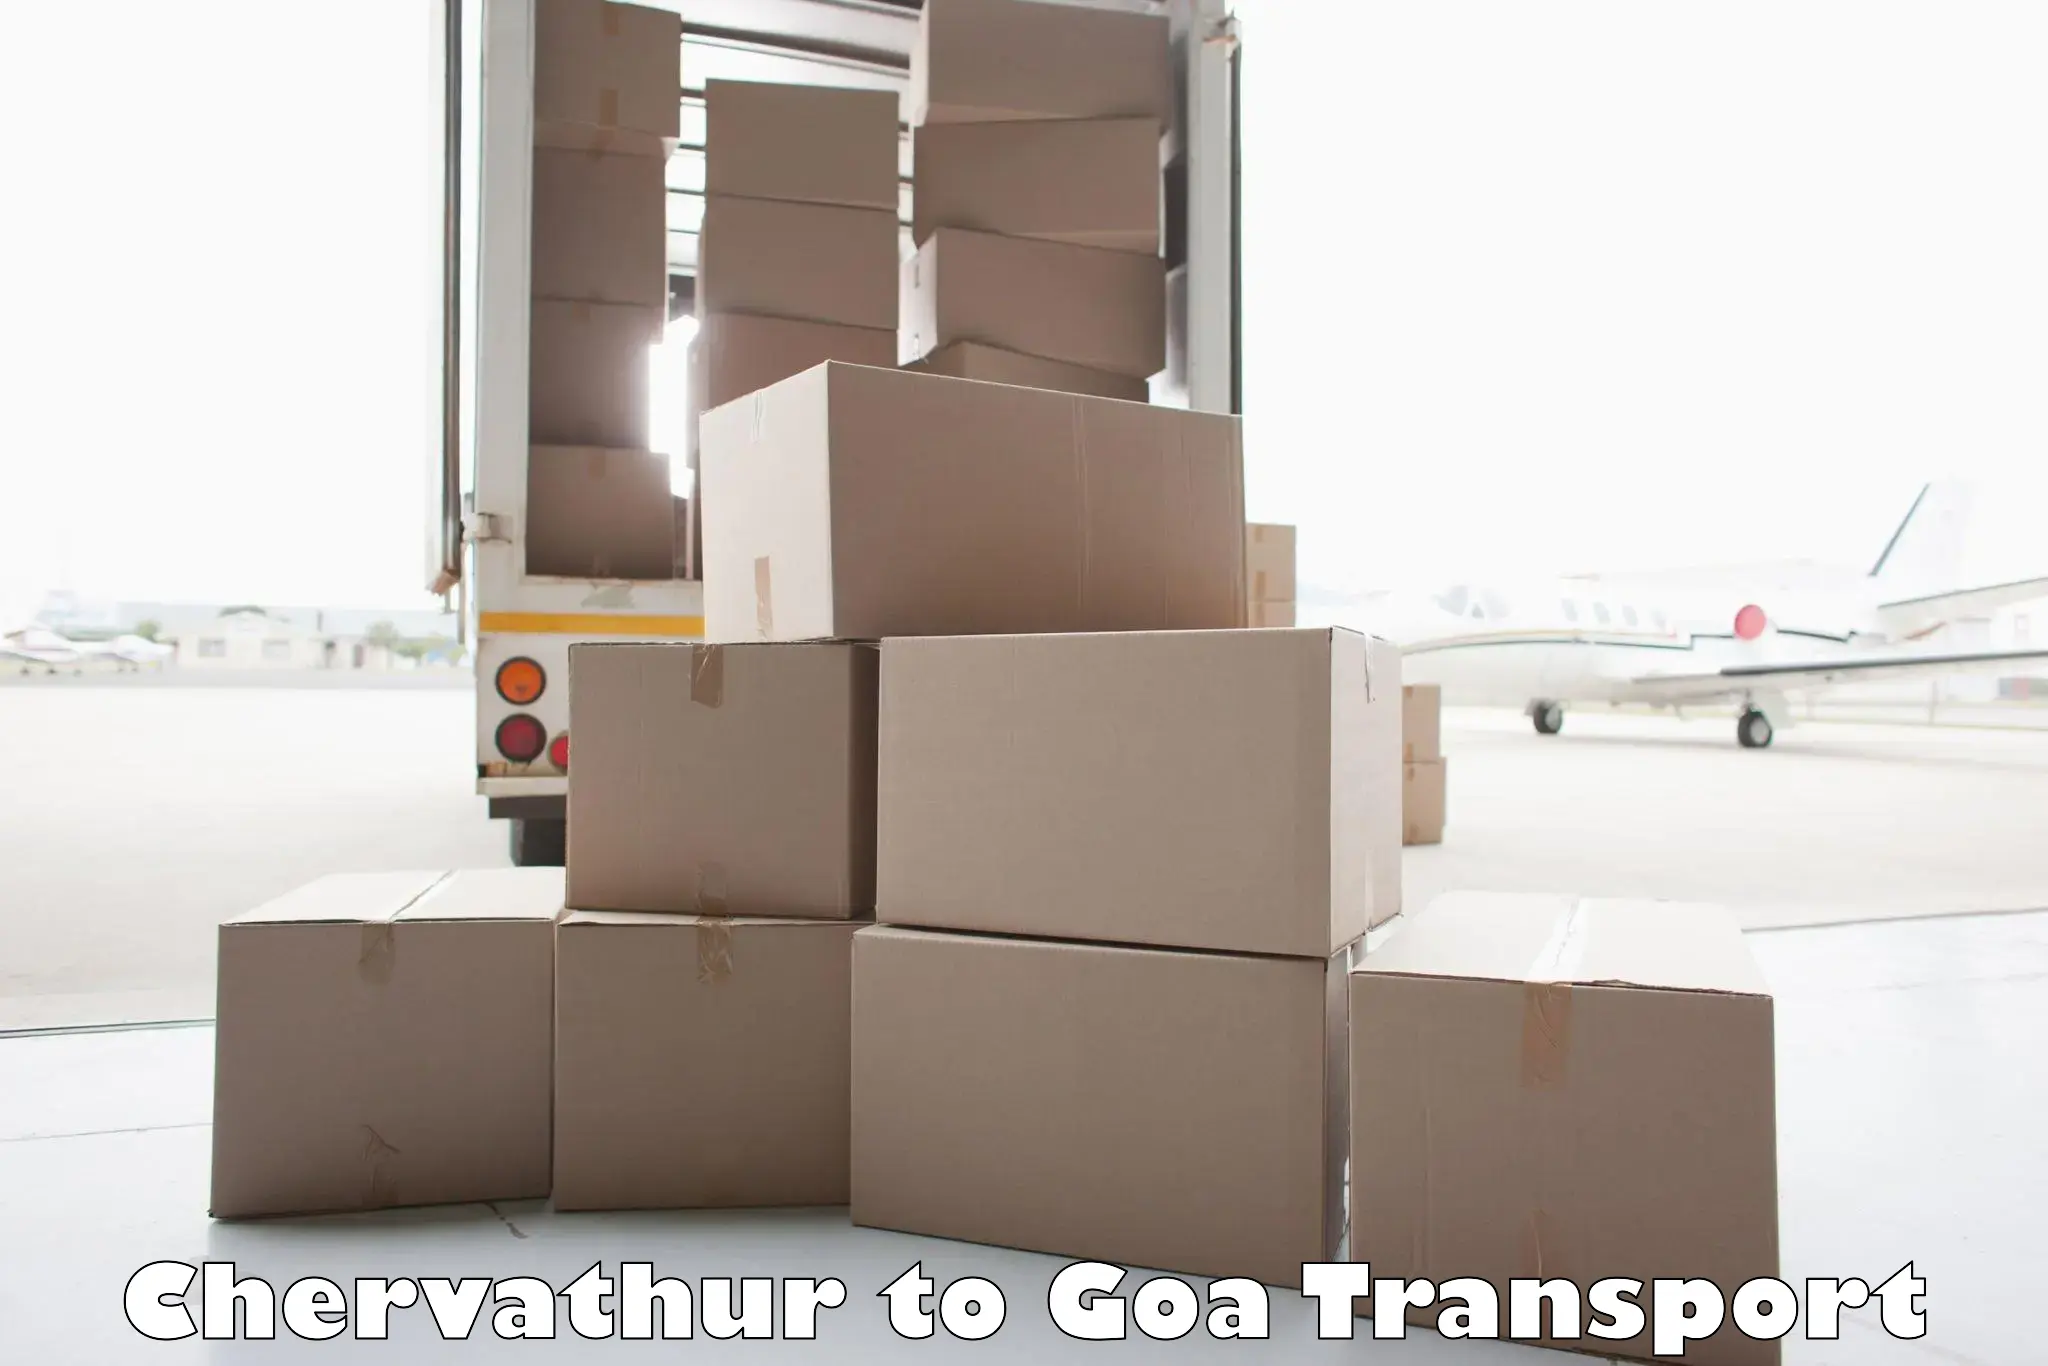 Transport bike from one state to another Chervathur to Goa